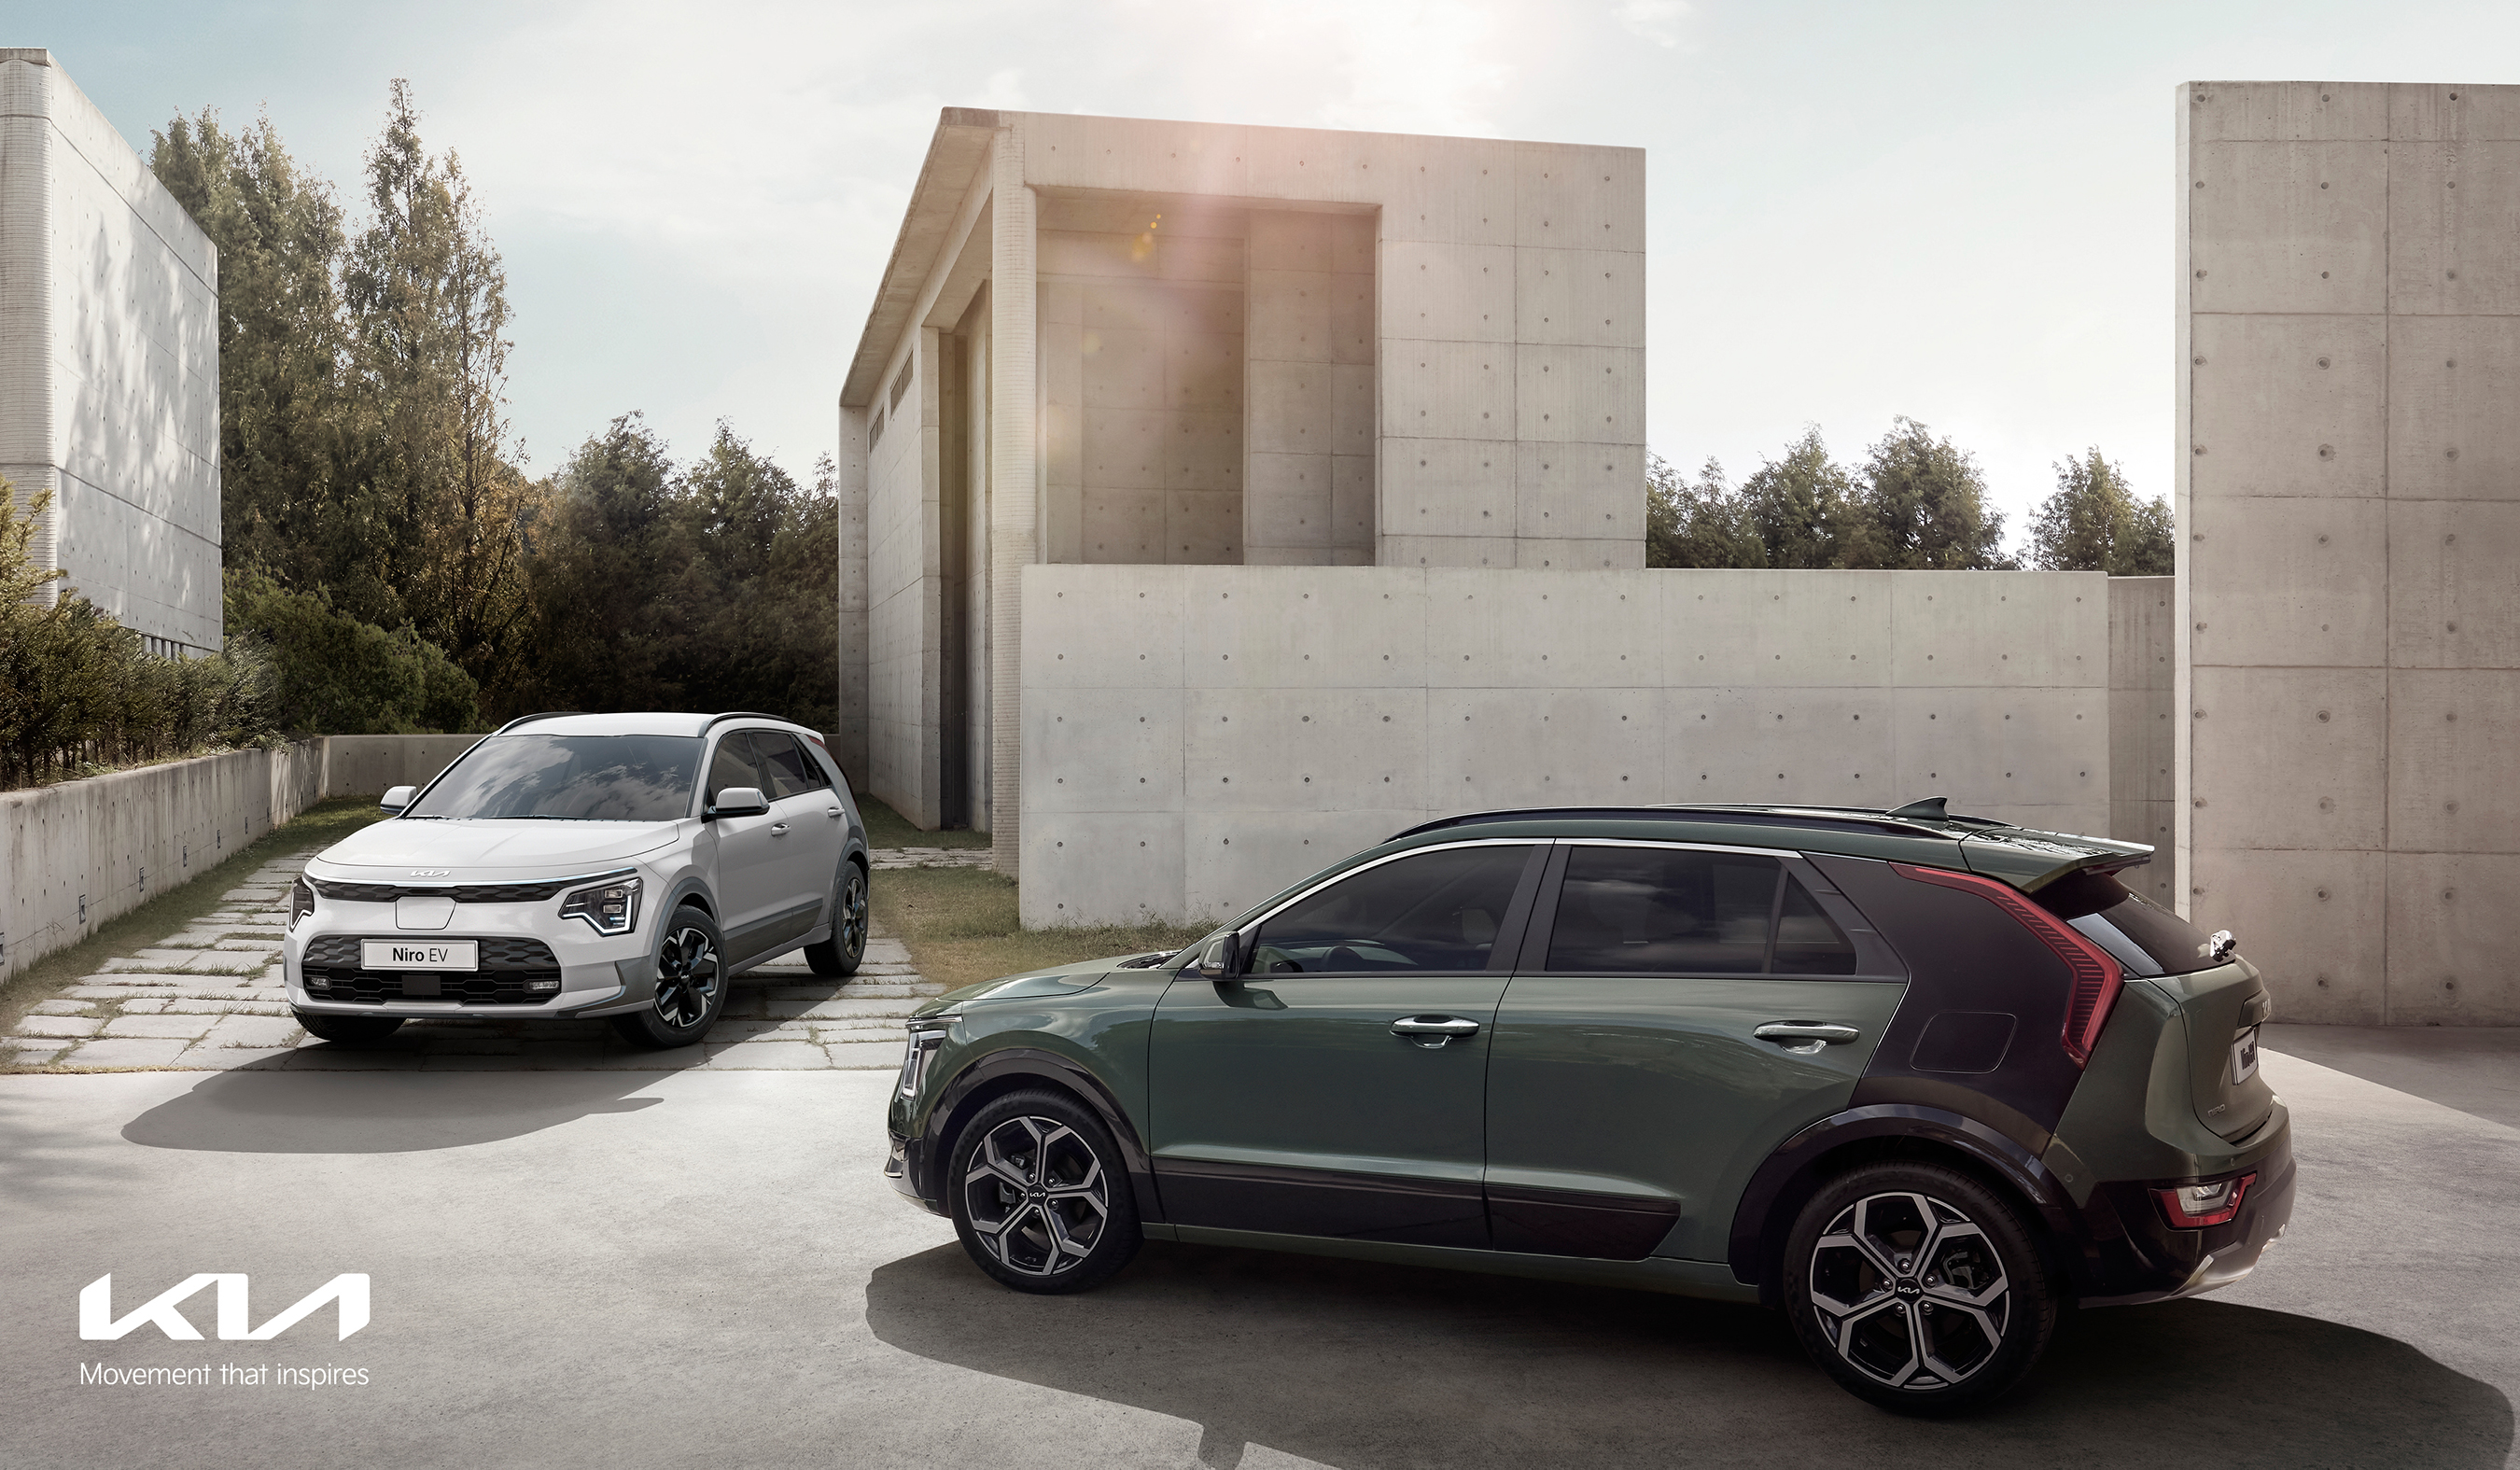 The all-new Niro embodies Kia's commitment to building a more sustainable future